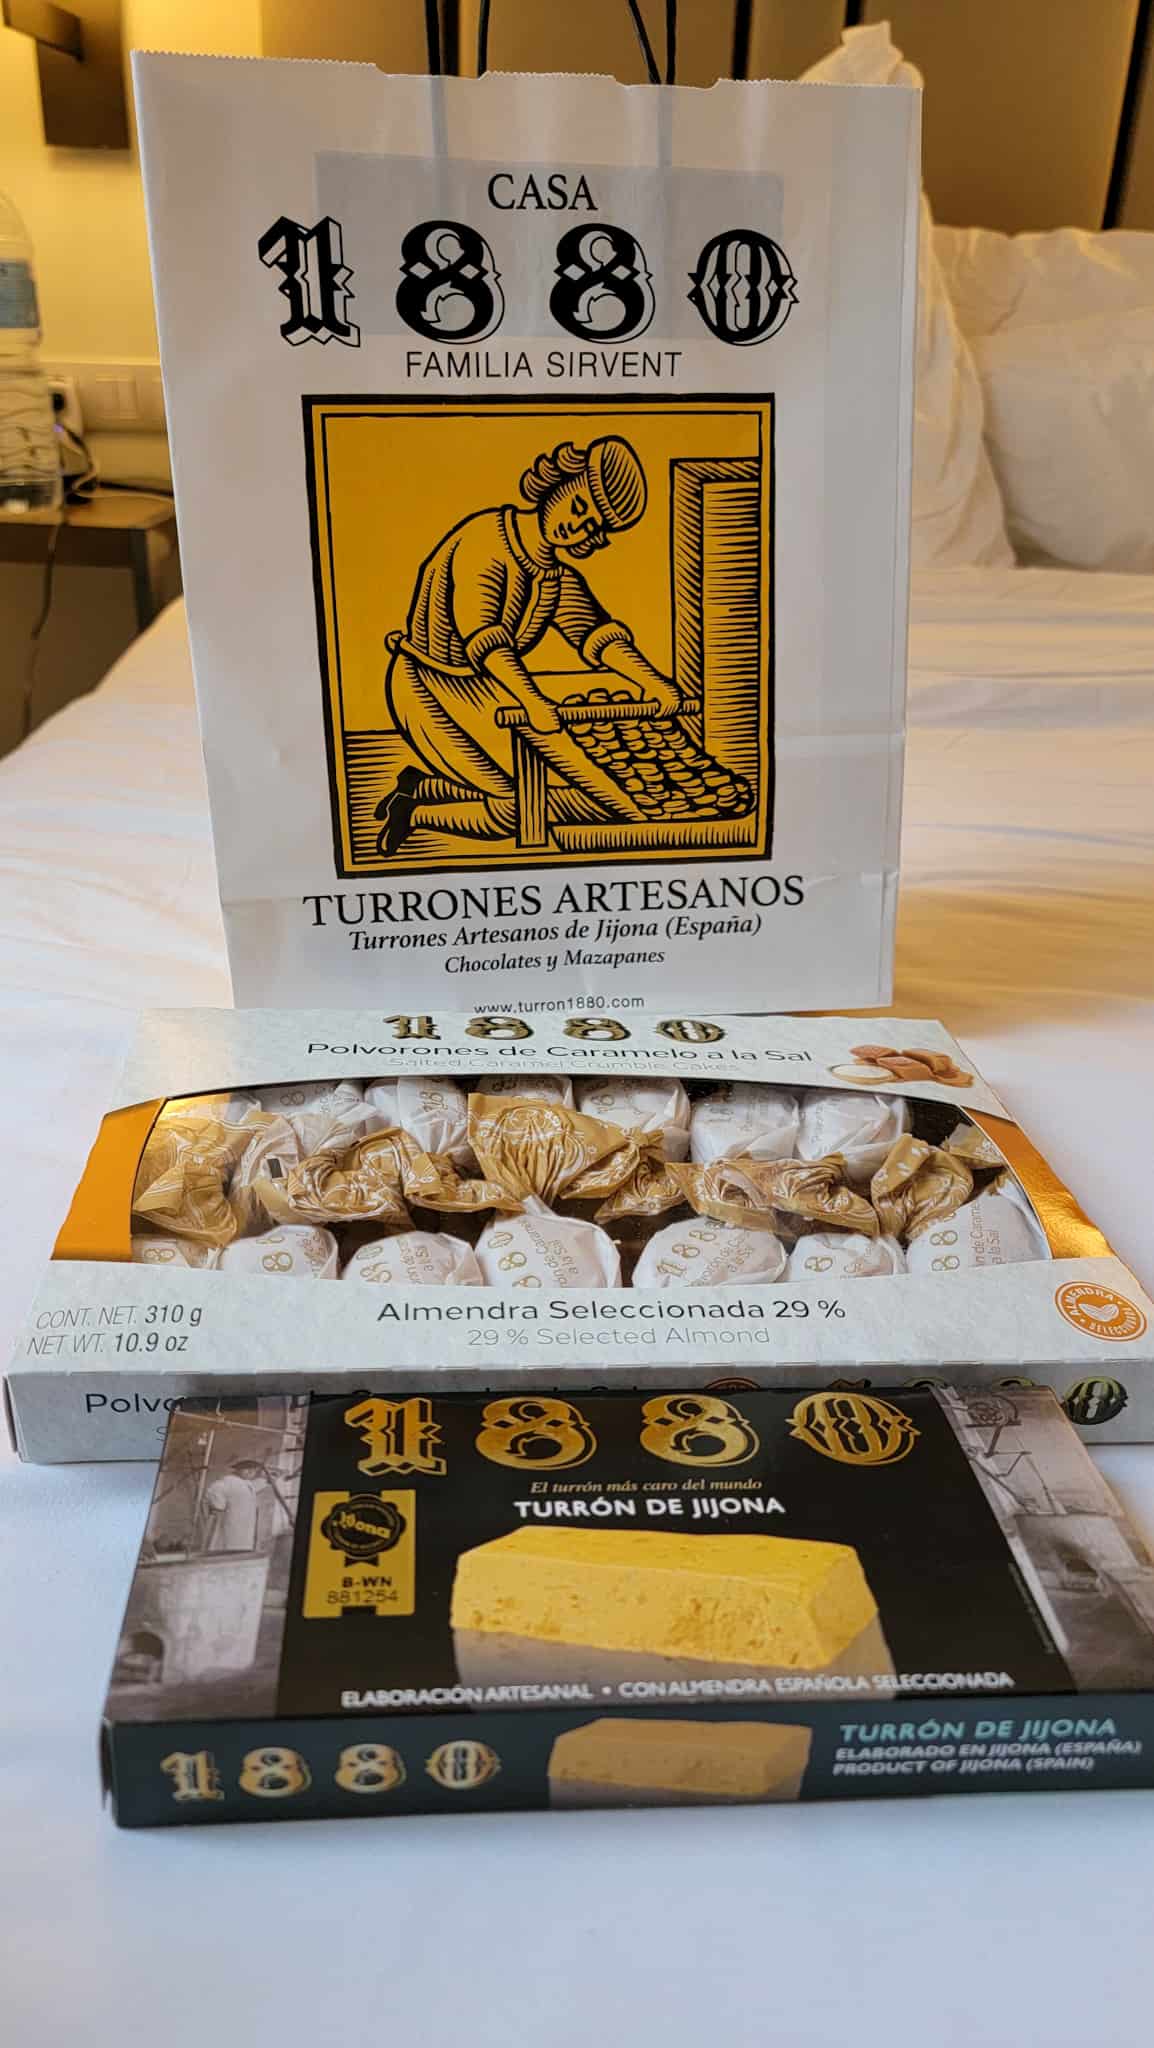 a box of polvorones and a bar of turon, the prefect spanish sweets to bring home